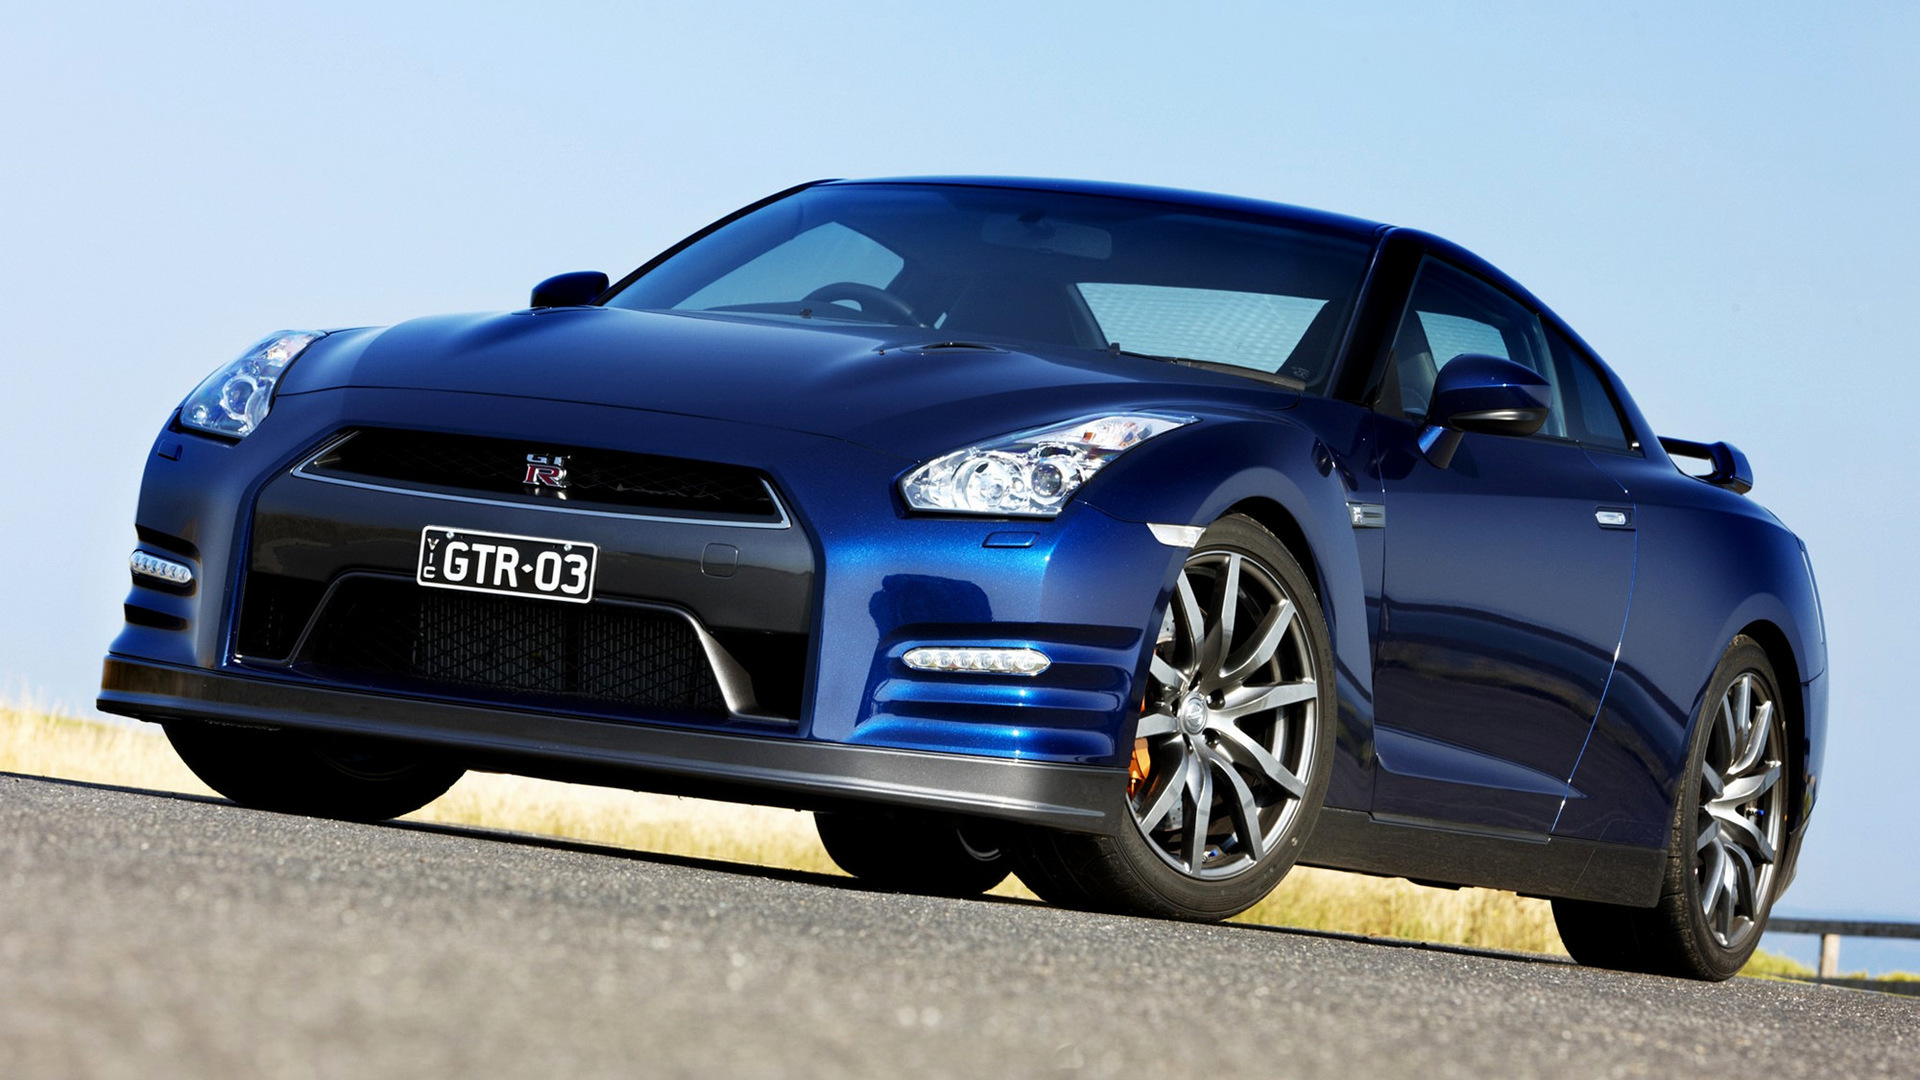 Nissan Gt R Wallpaper Image Photos Pictures Background